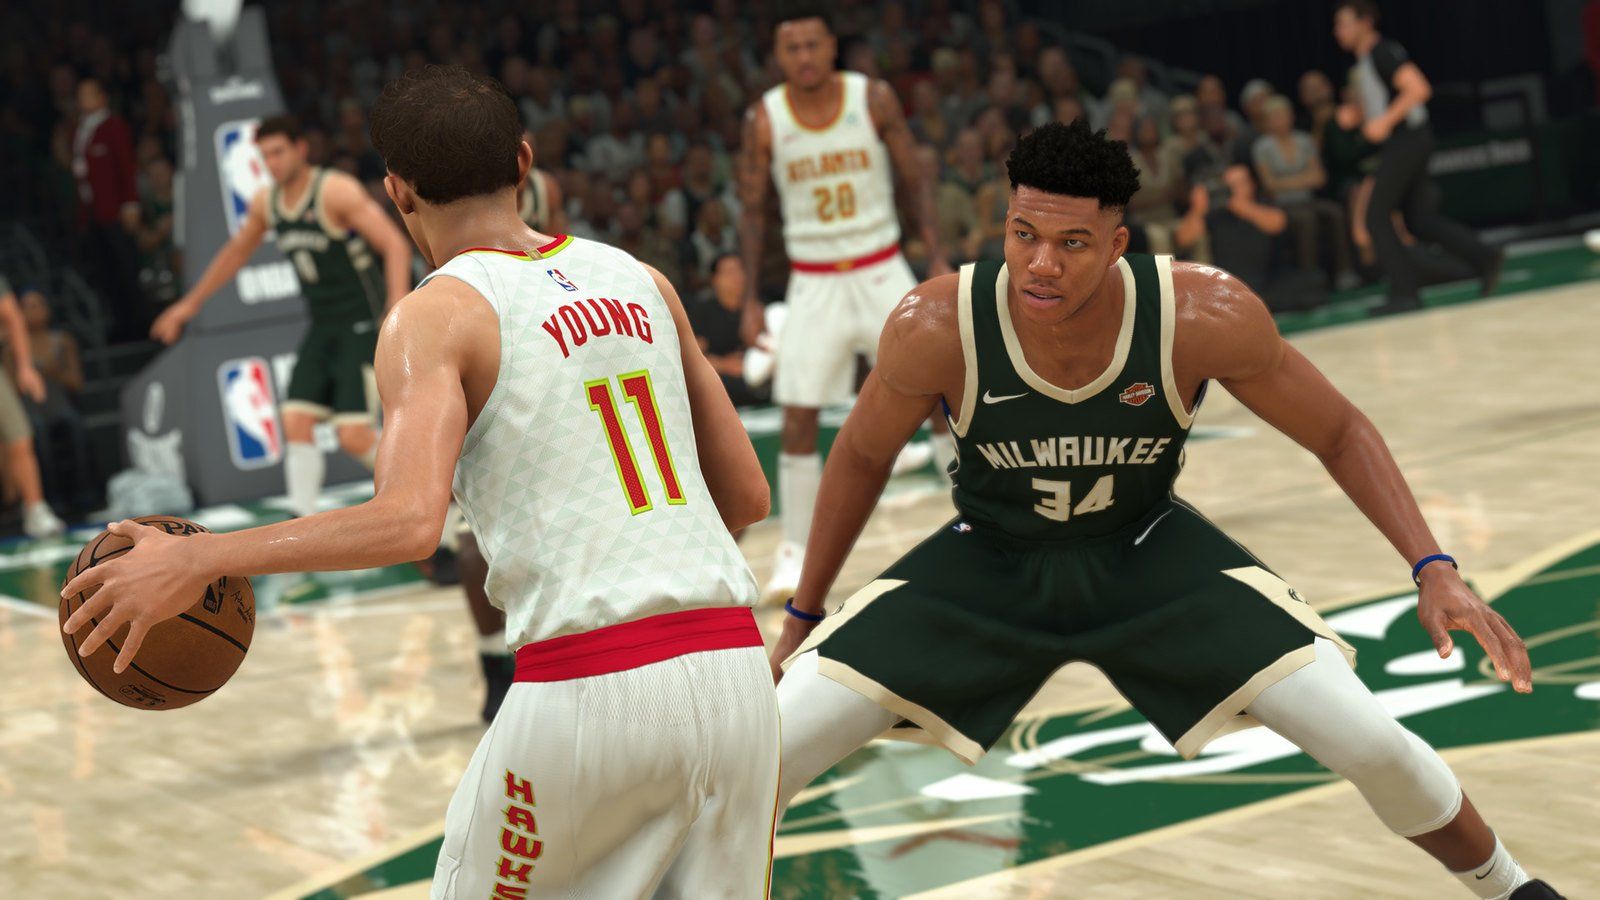 NBA 2K21 Demo Out on PS4 Now, Features MyPLAYER Builder